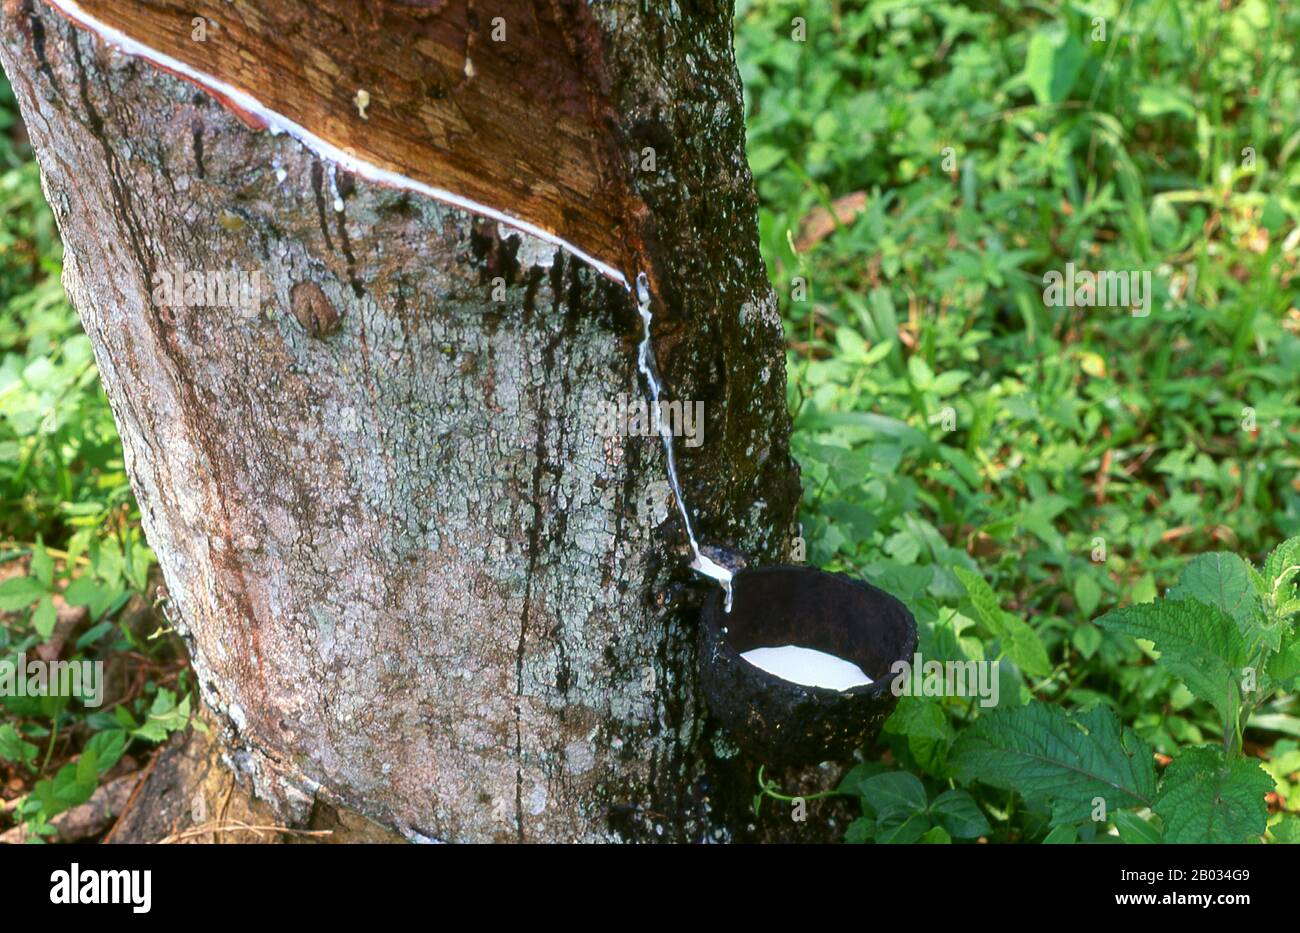 Natural rubber, also called India rubber or caoutchouc, as initially  produced, consists of polymers of the organic compound isoprene, with minor  impurities of other organic compounds plus water. The major commercial  source